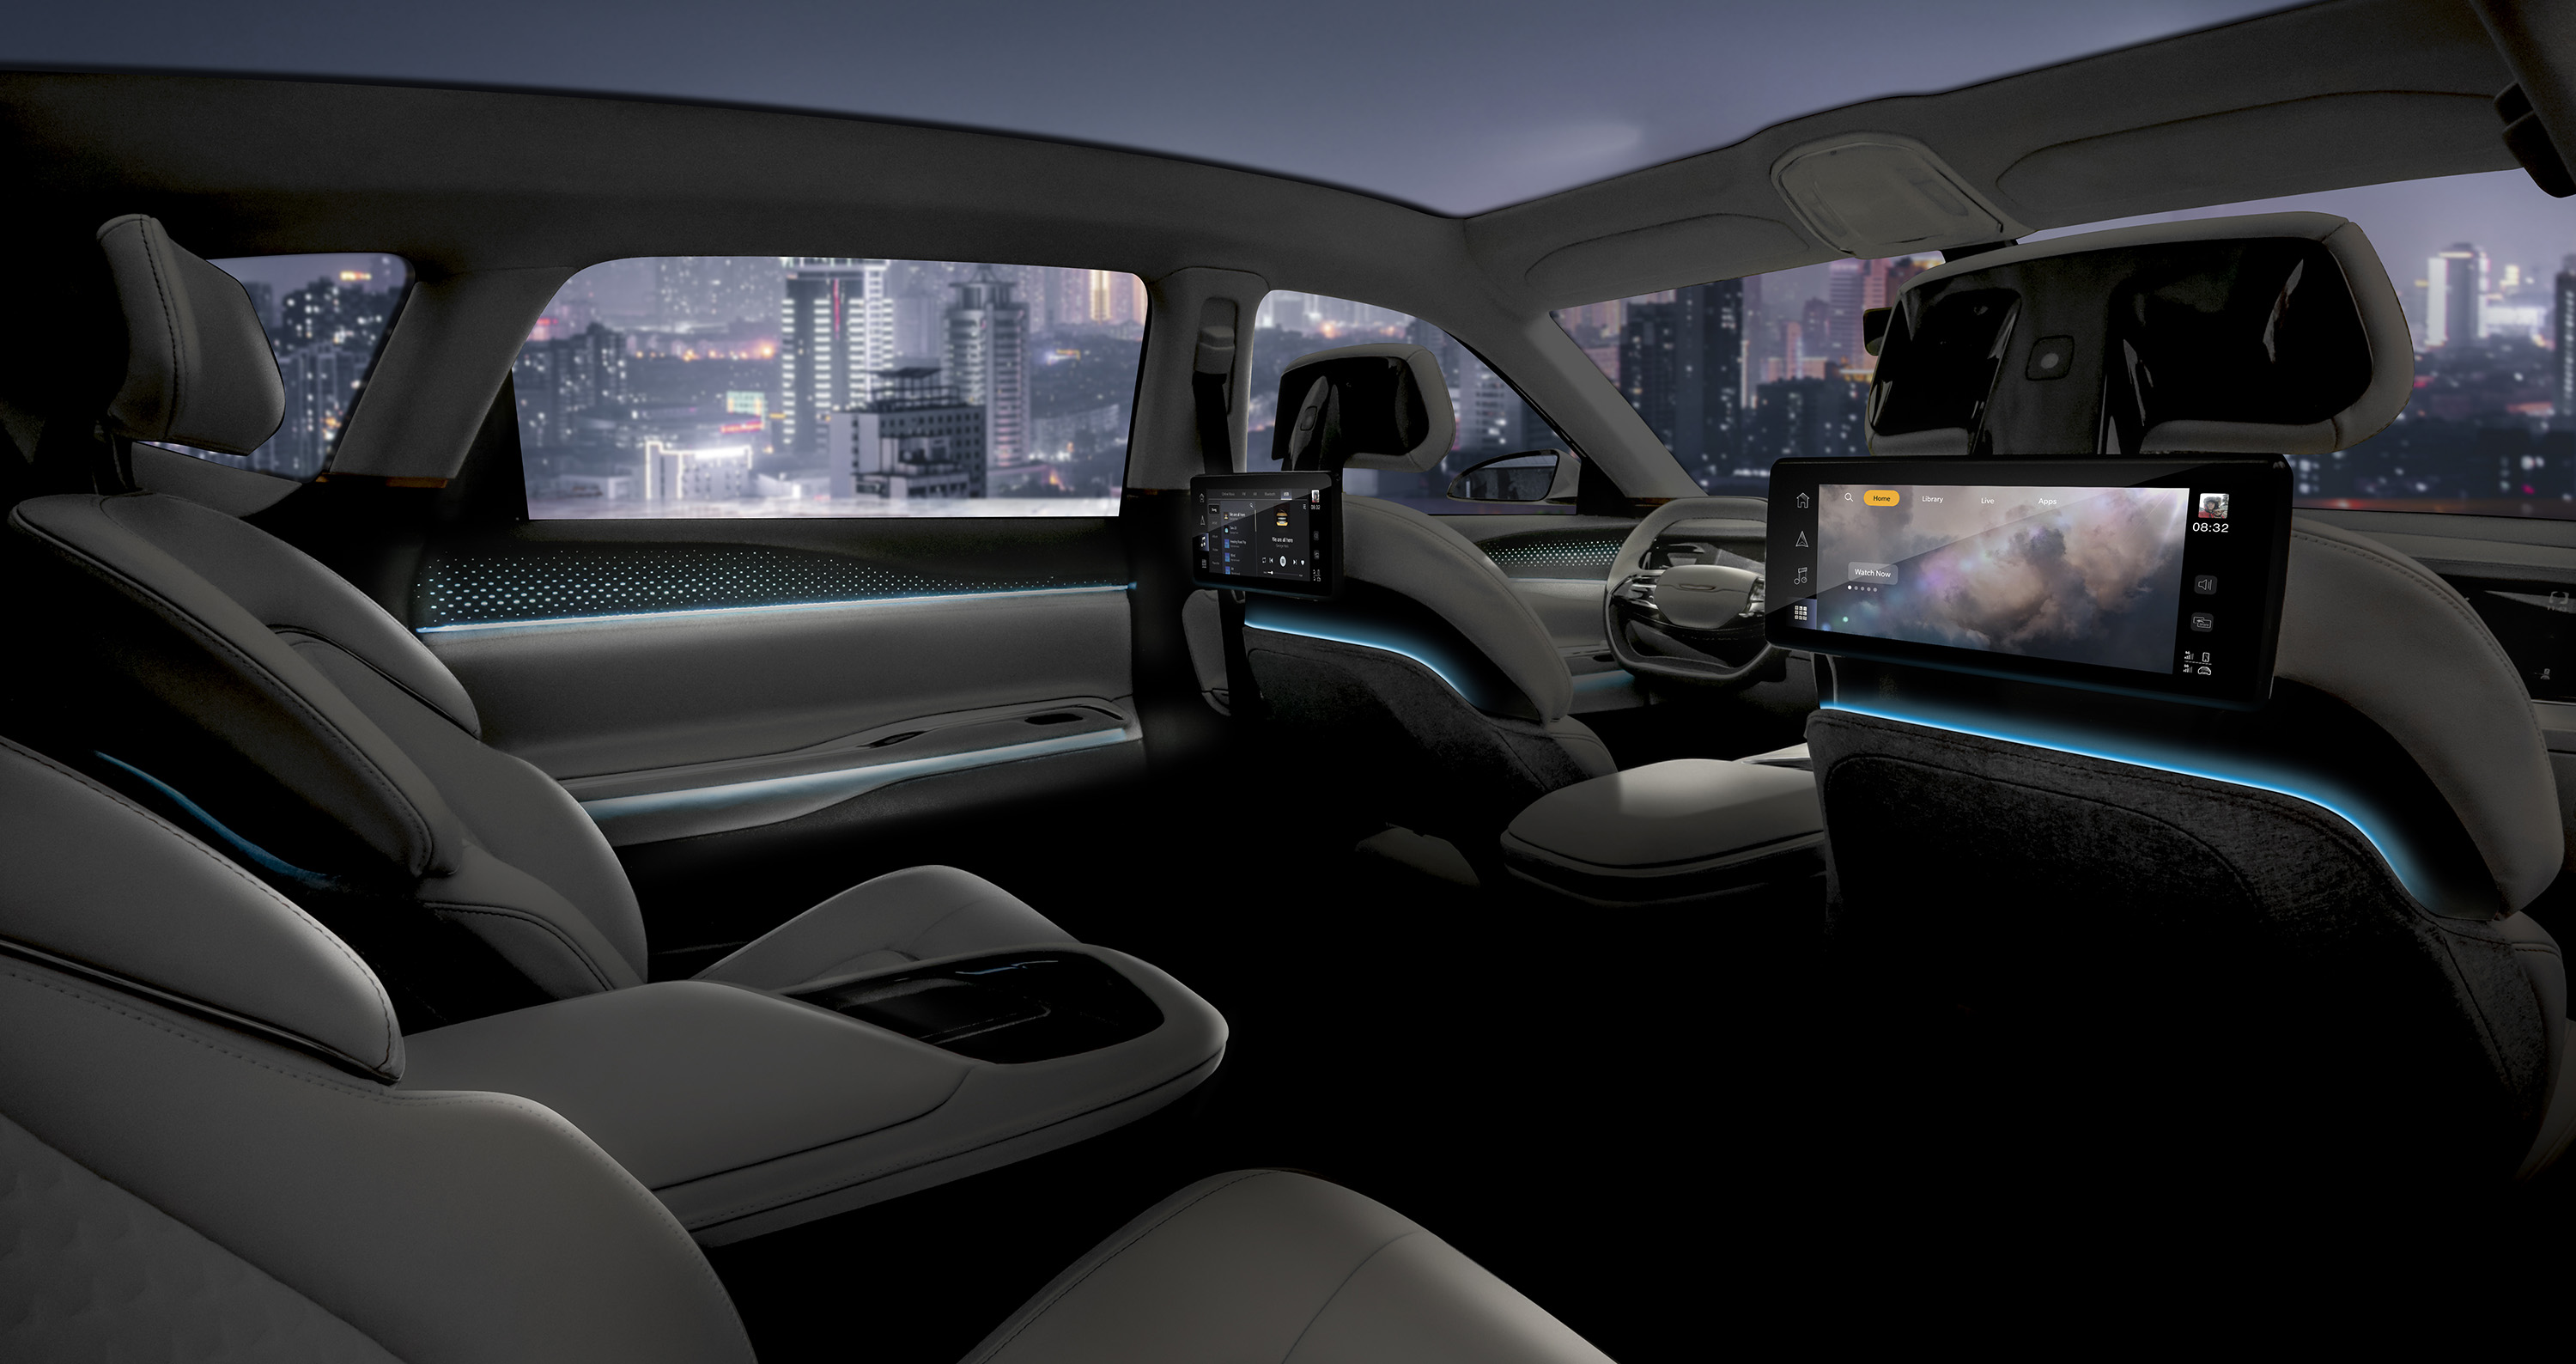 Ambient lighting in the Chrysler Airflow Concept reveals itself in direct lines, adding modernity, and syncs to the mood of the interior and changes based on the passengersâ€™ preferences and the content on the displays.